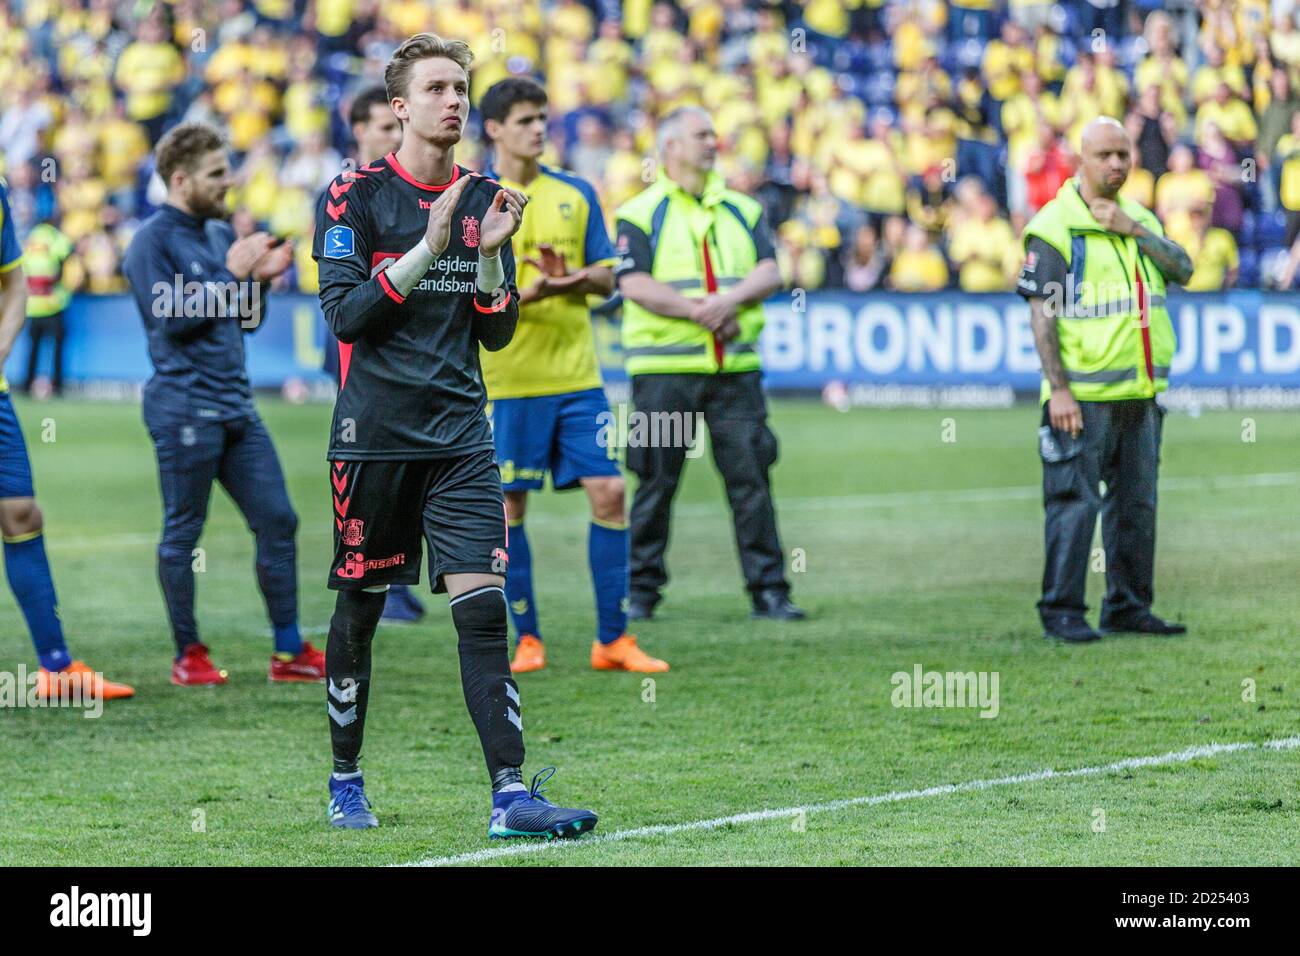 Brondby, Denmark. 21st, May 2018. Goalkeeper Frederik Ronnow (1) of Broendby IF seen after the 3F Superliga match between Broendby IF and AAB at Brondby Stadium. (Photo credit: Gonzales Photo - Thomas Rasmussen). Stock Photo